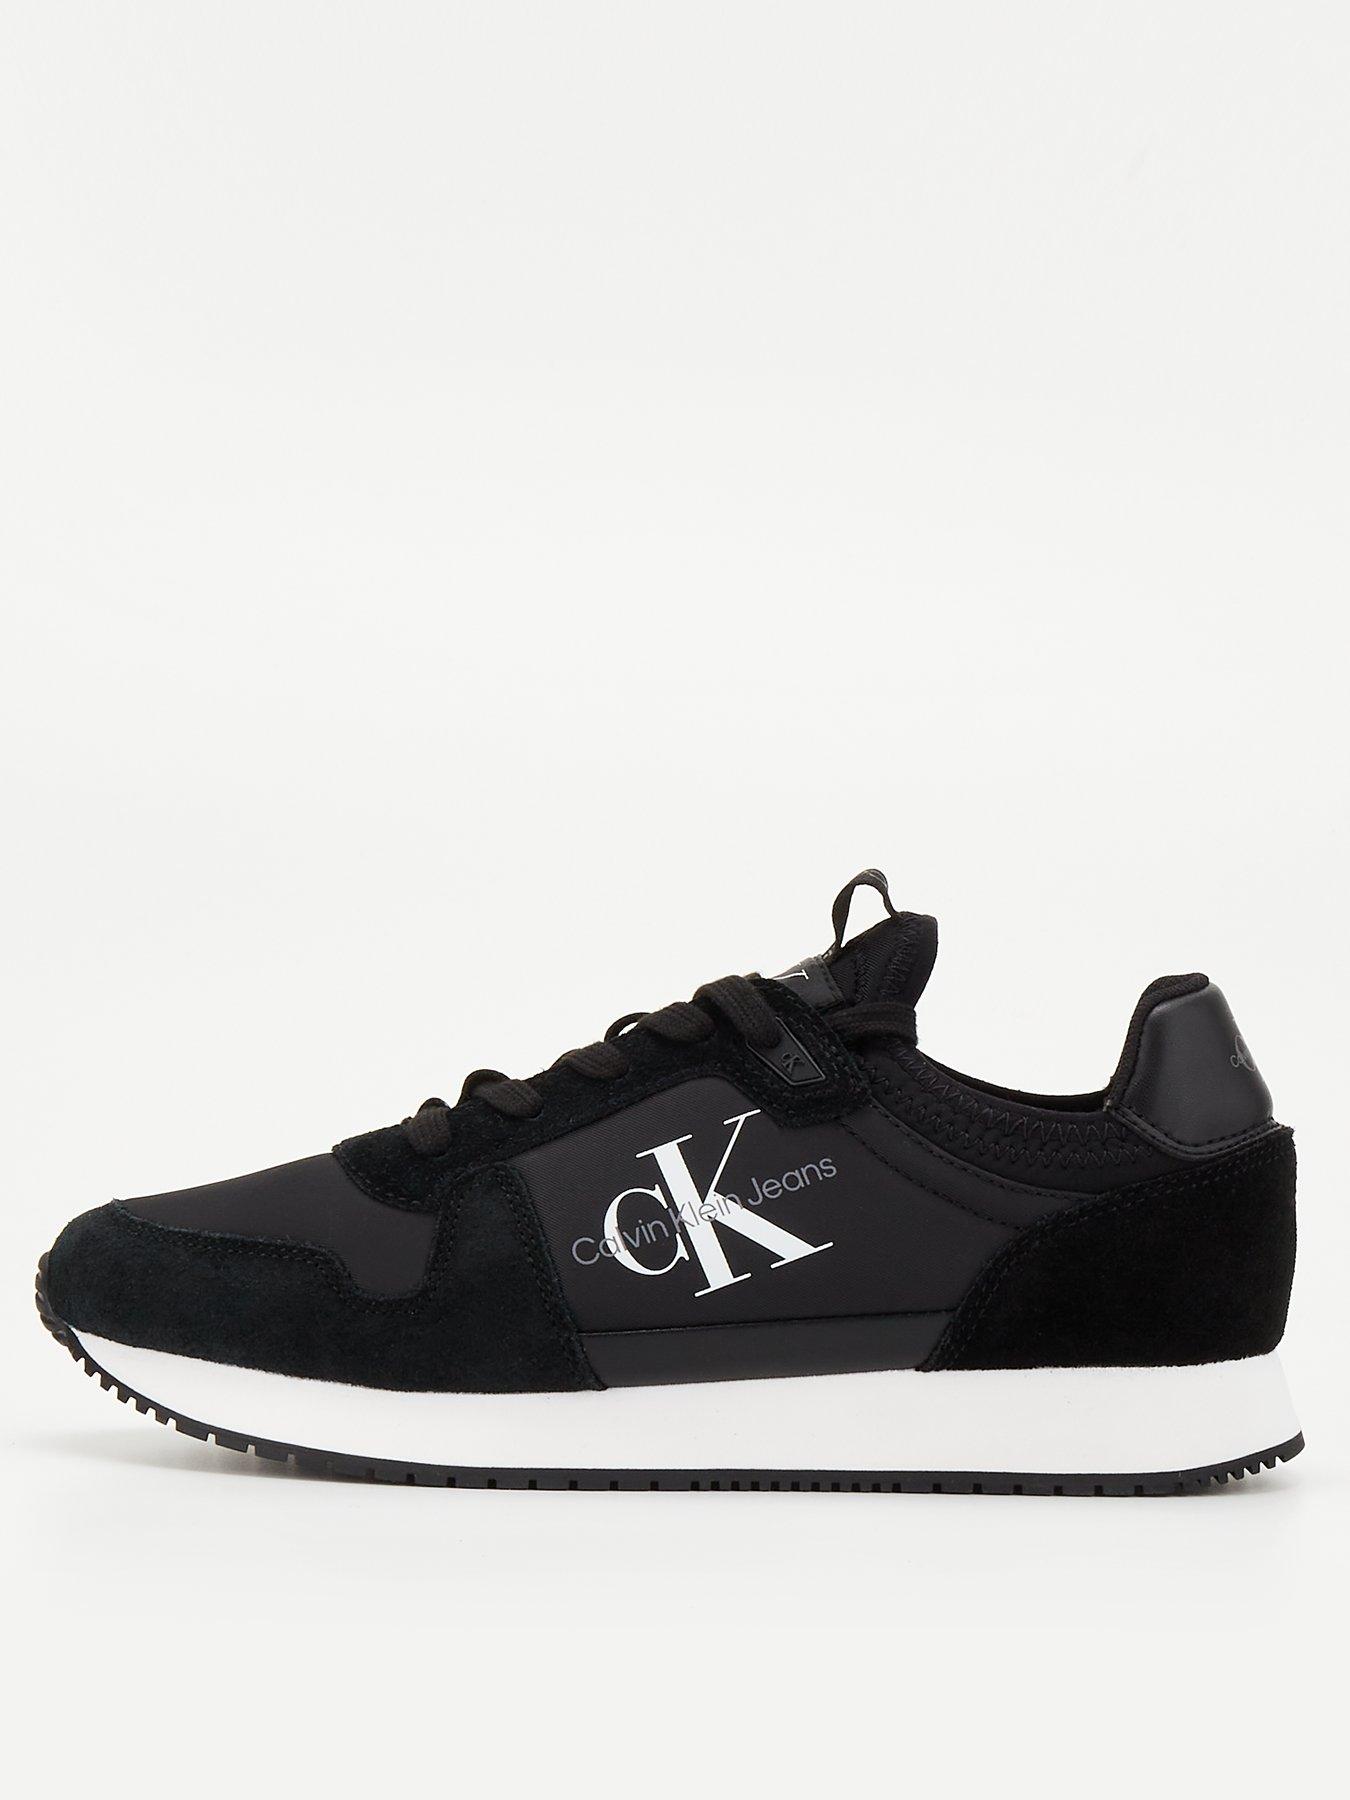 Calvin Klein Jeans CLASSIC CUPSOLE LACEUP LOW LTH White - Free delivery